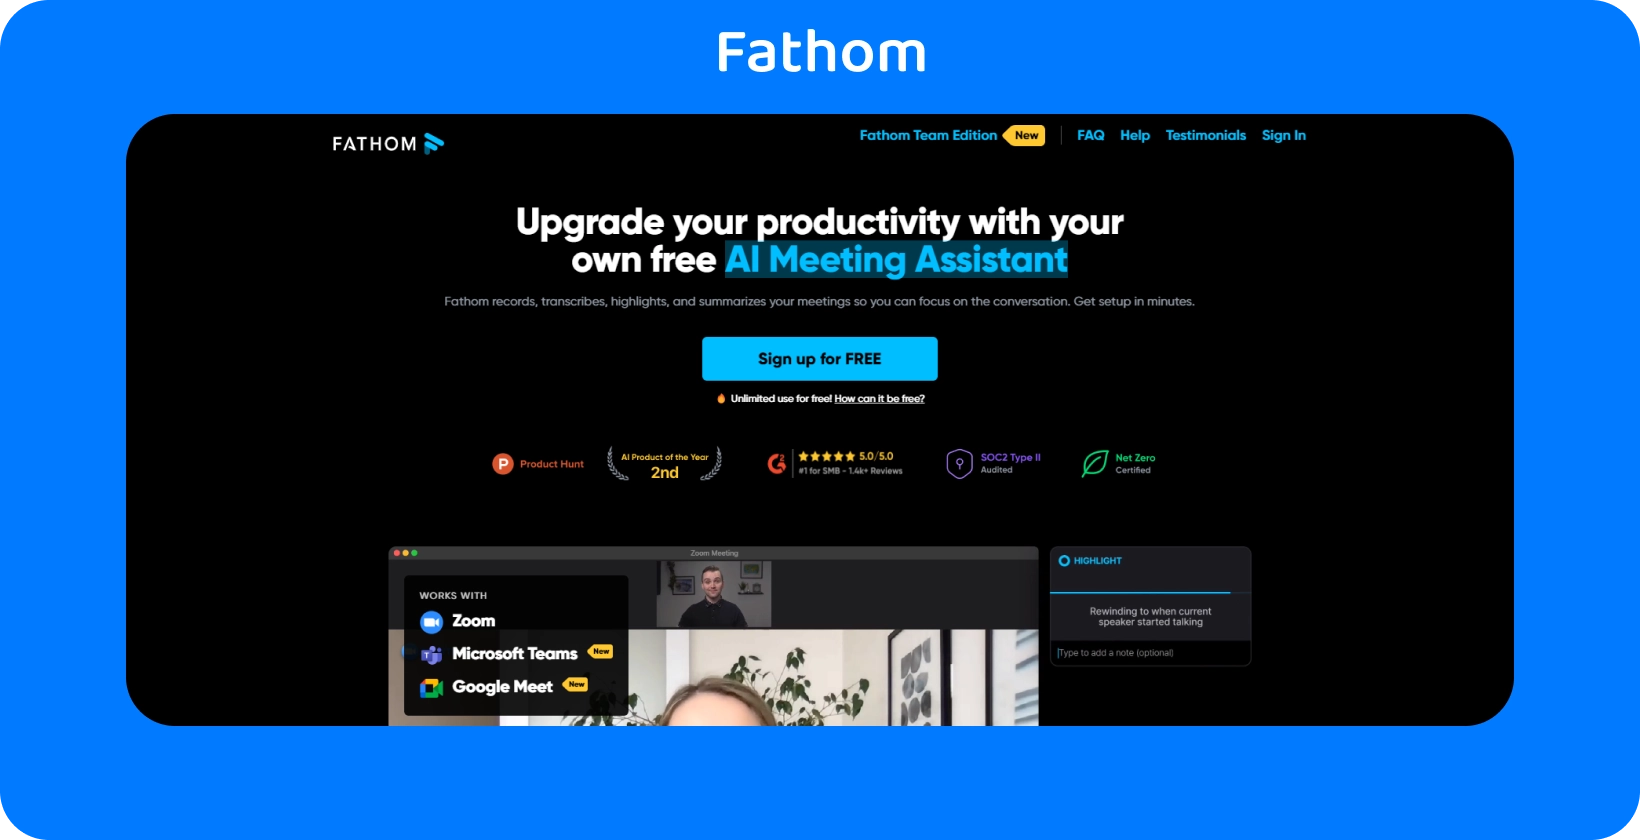 Fathom's webpage shows its AI Meeting Assistant for enhanced productivity through recording and transcribing services.